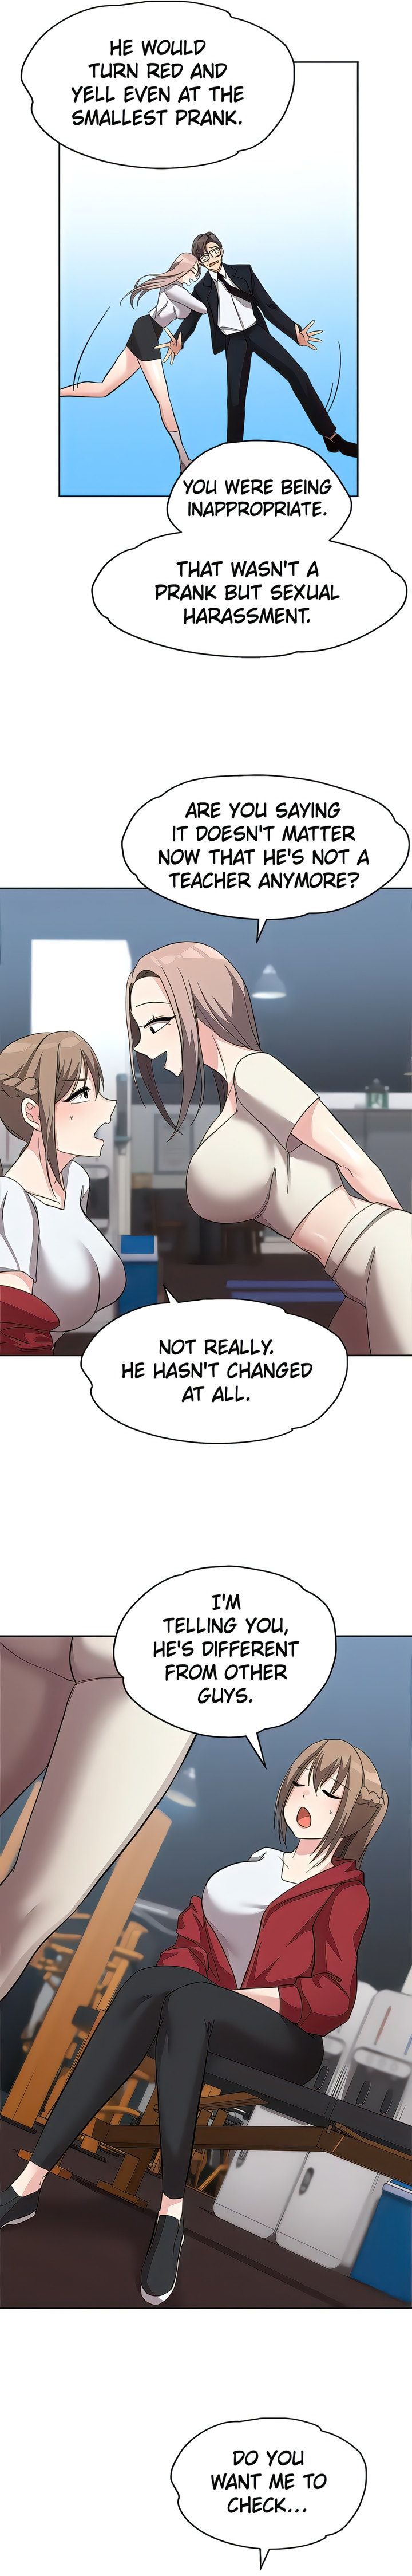 Girls I Used to Teach - Chapter 16 Page 22